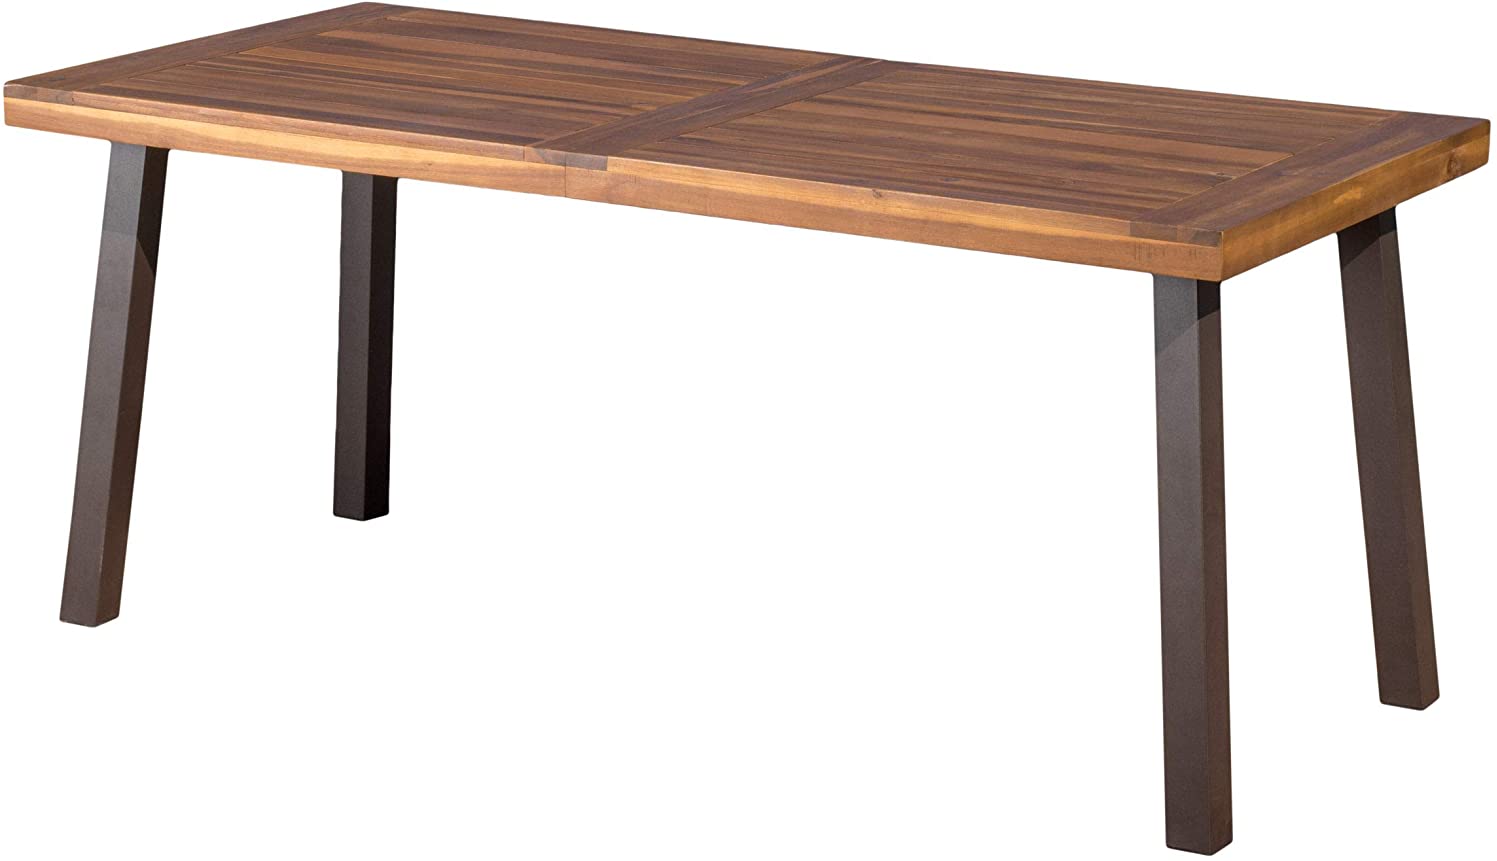 B01GP0FTZE Christopher Knight Home Della Acacia Wood Dining Table, Natural Stained With Rustic Metal